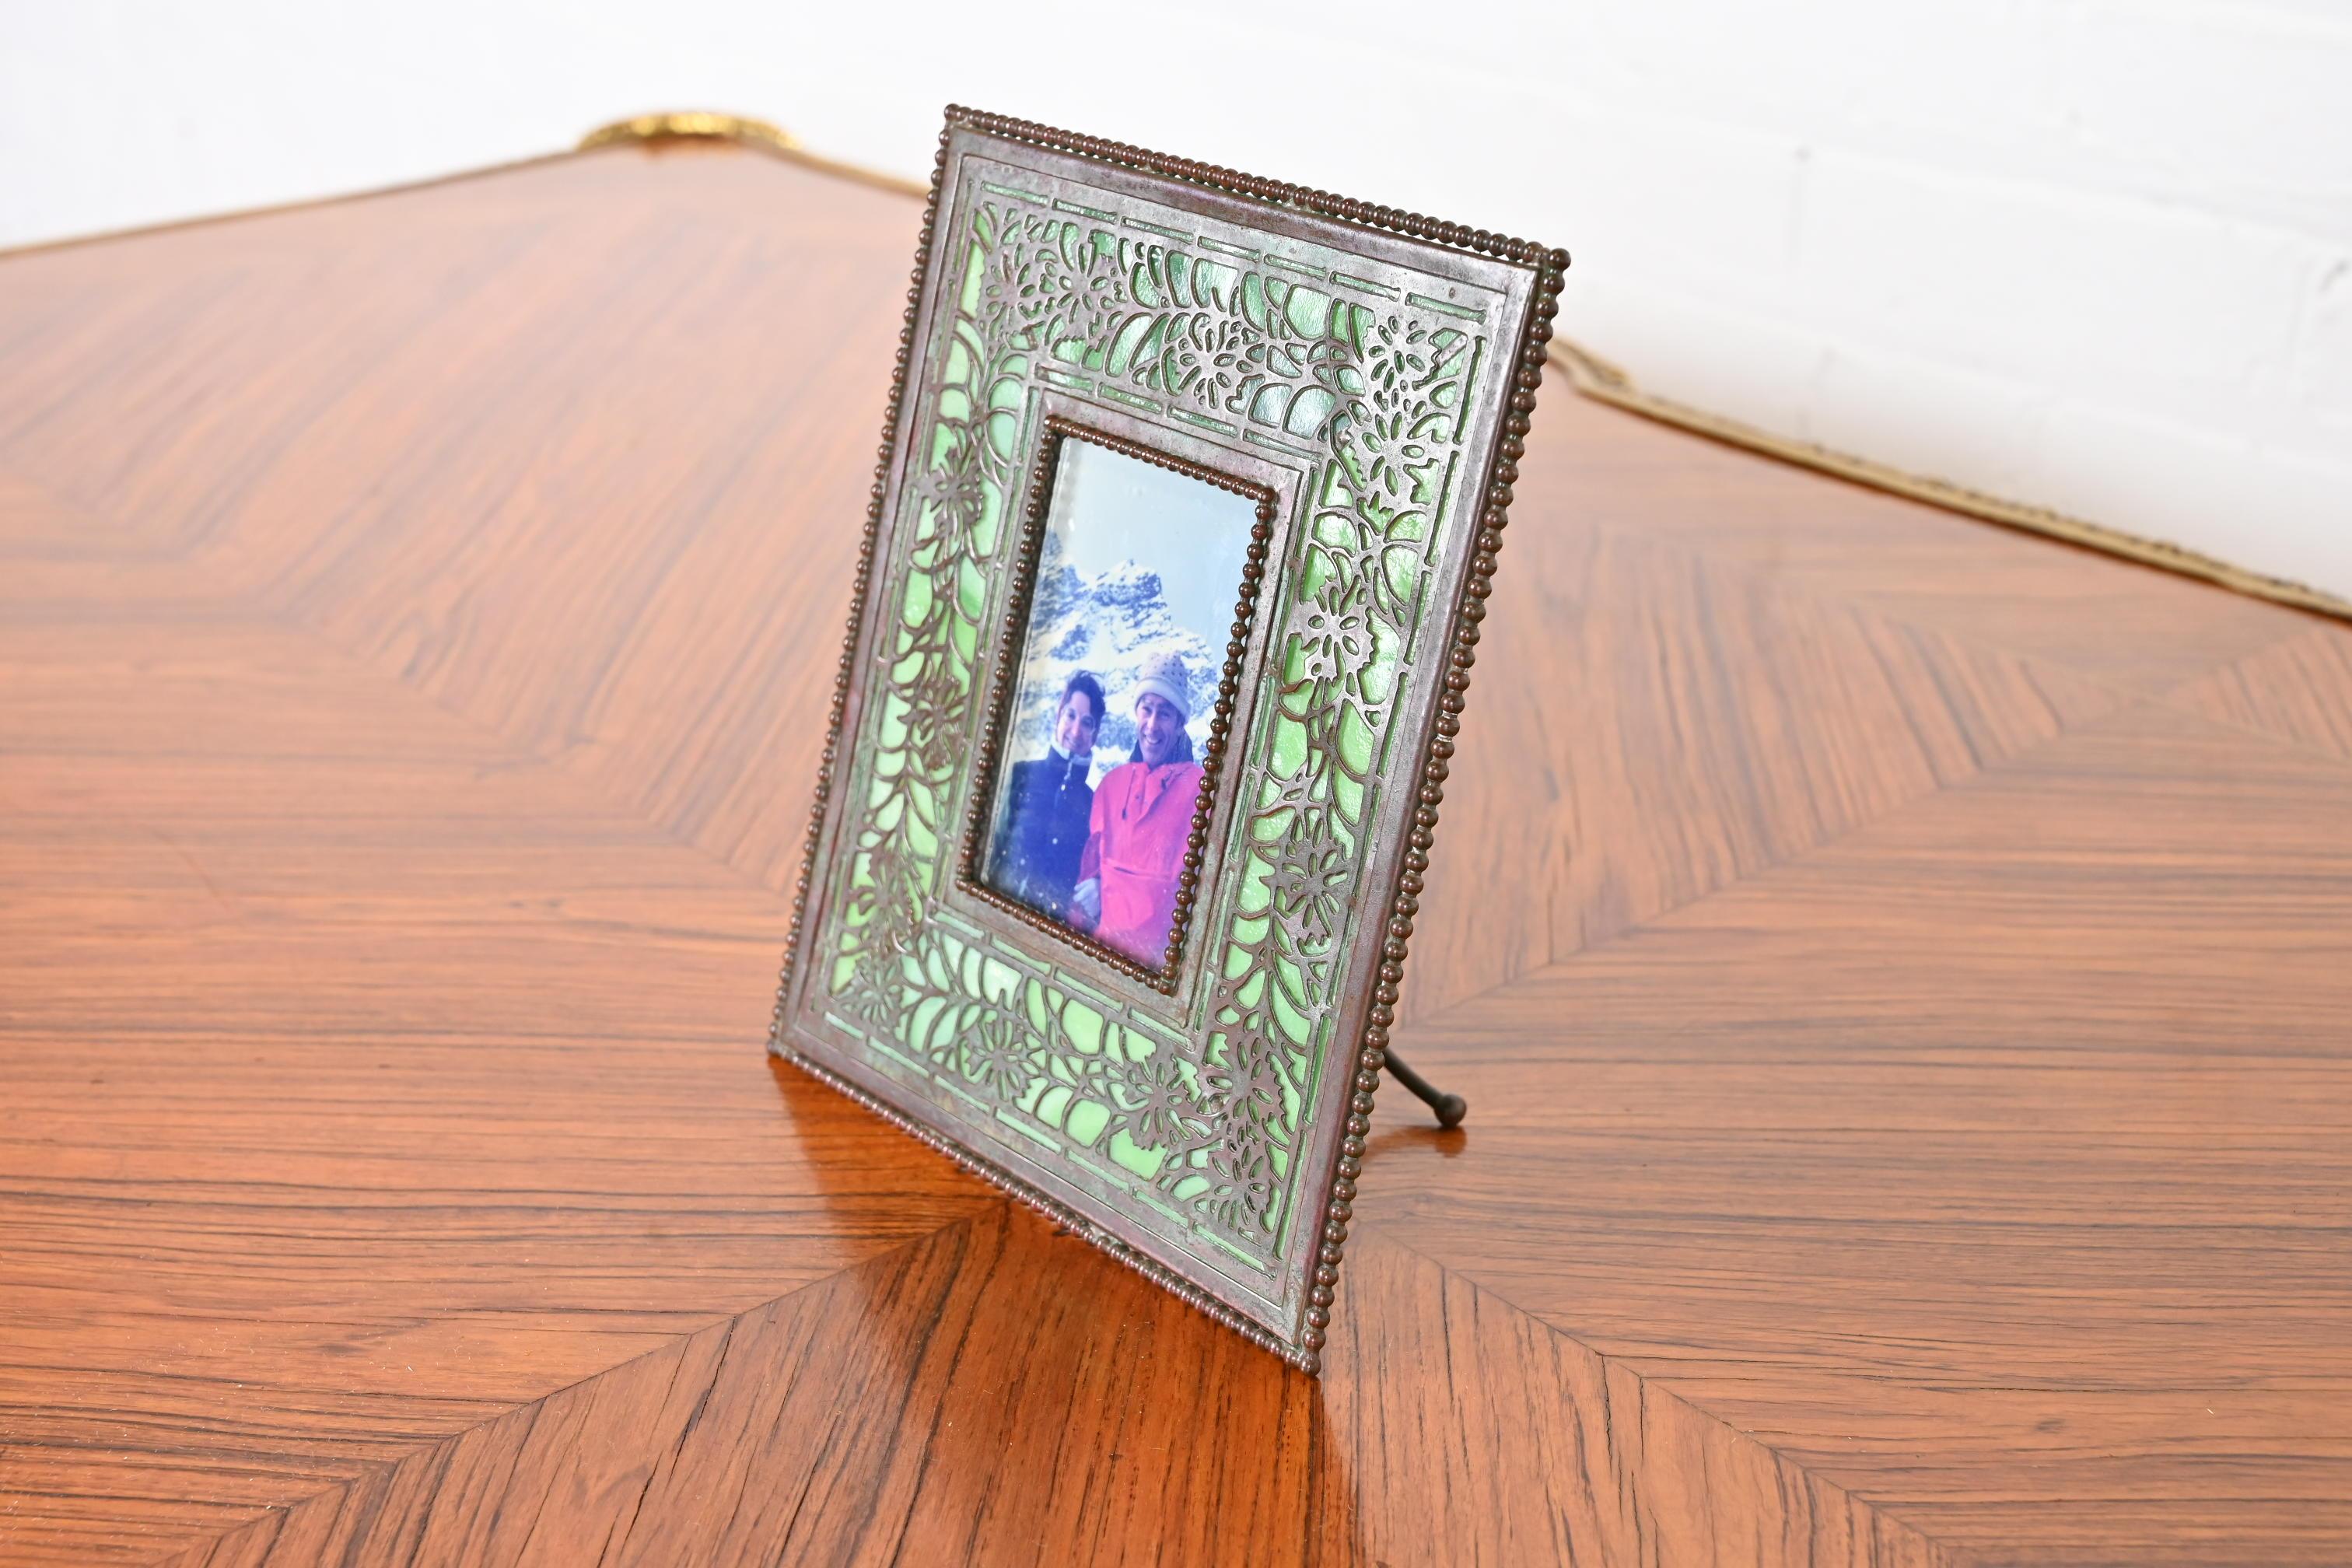 American Tiffany Studios New York Art Nouveau Bronze and Slag Glass Picture Frame